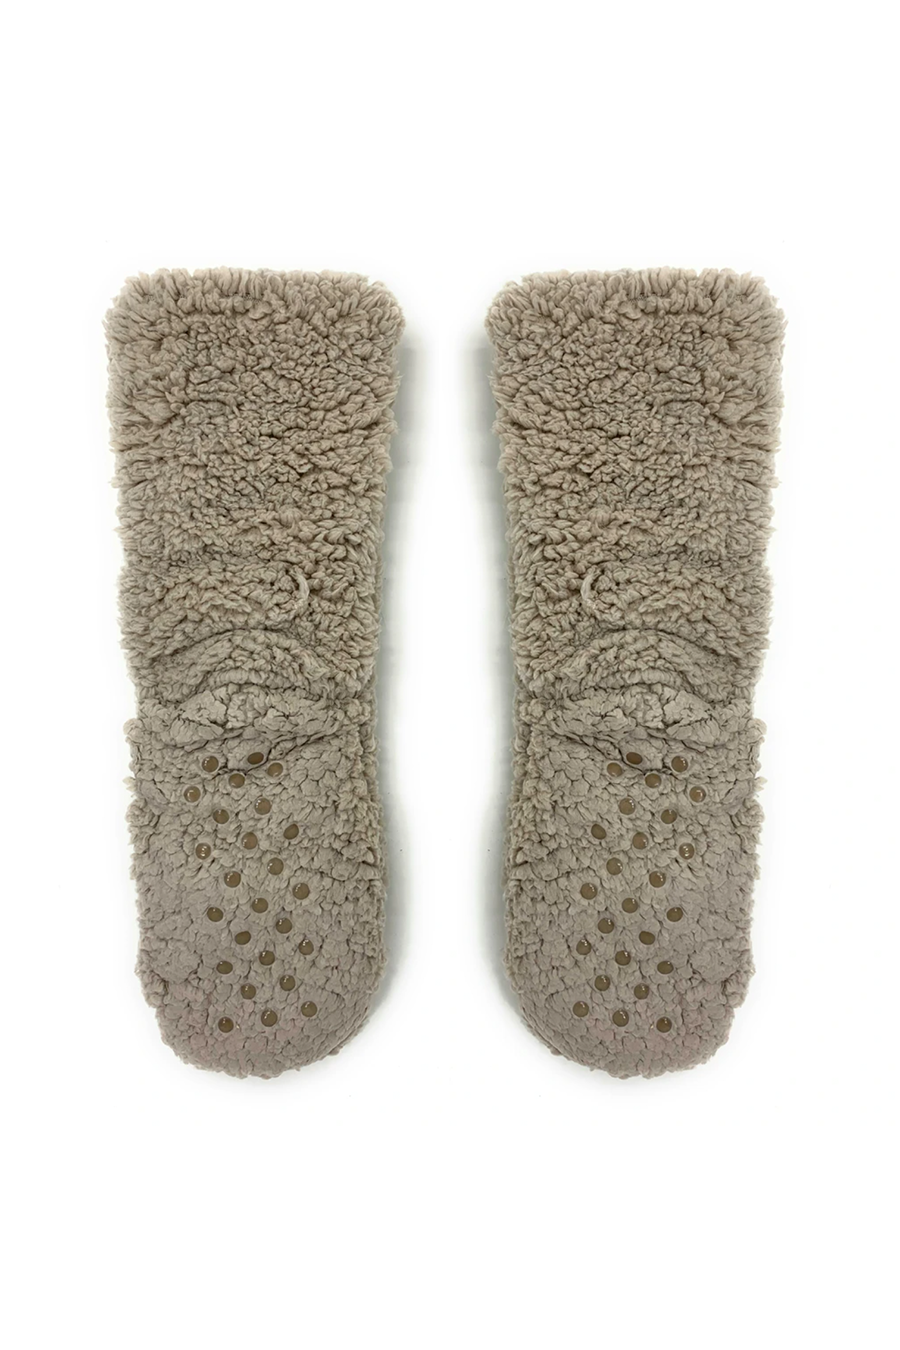 Women's Sherpa Slipper | Sloth Time - Main Image Number 2 of 2